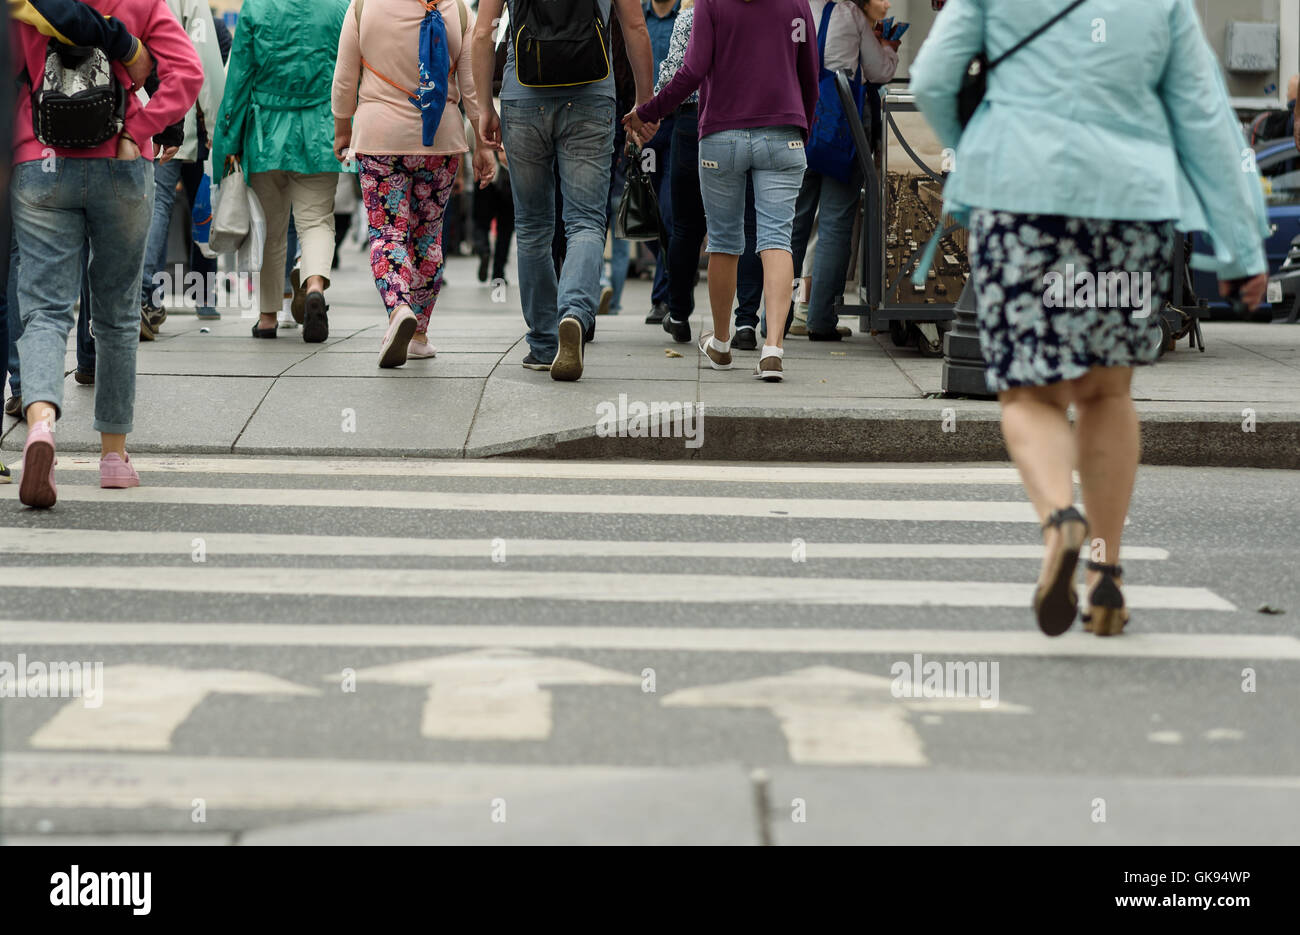 legs of people on a pedestrian crossing on a cloudy day Stock Photo